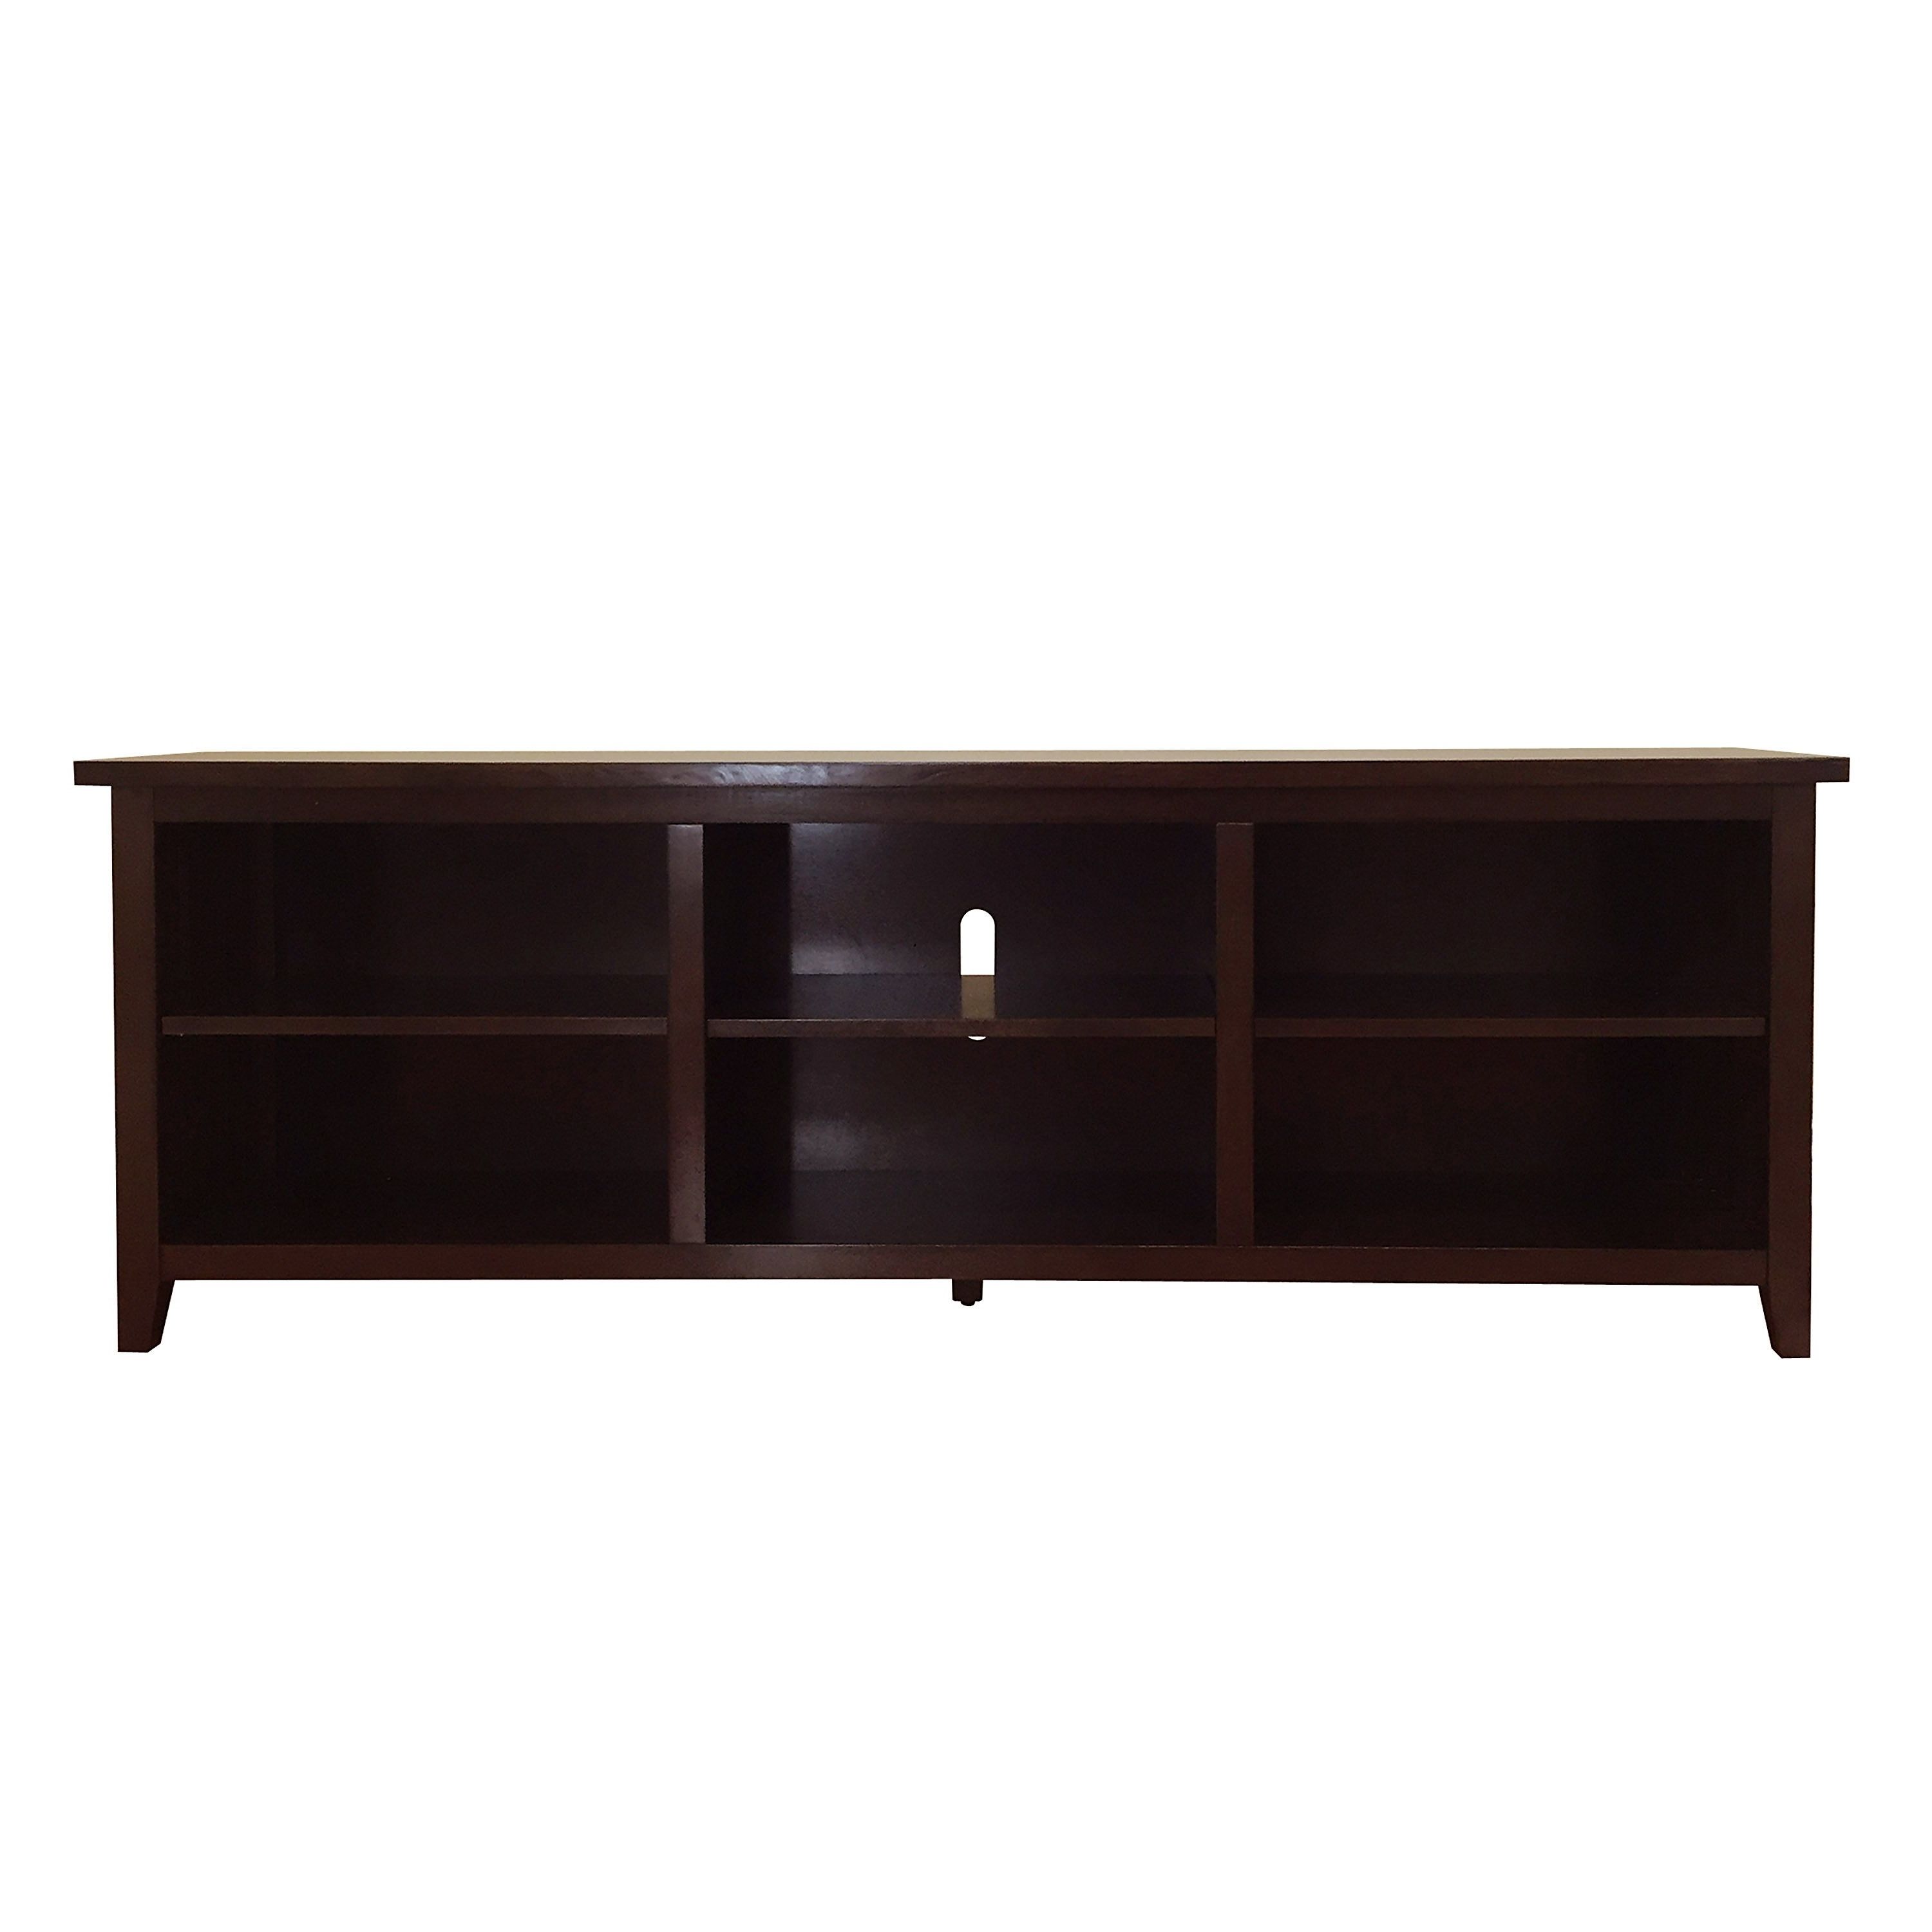 Shop Brookdale Dark Walnut Tv Stand – N/a – On Sale – Free Shipping Throughout Most Current Walnut Tv Stands (View 15 of 20)